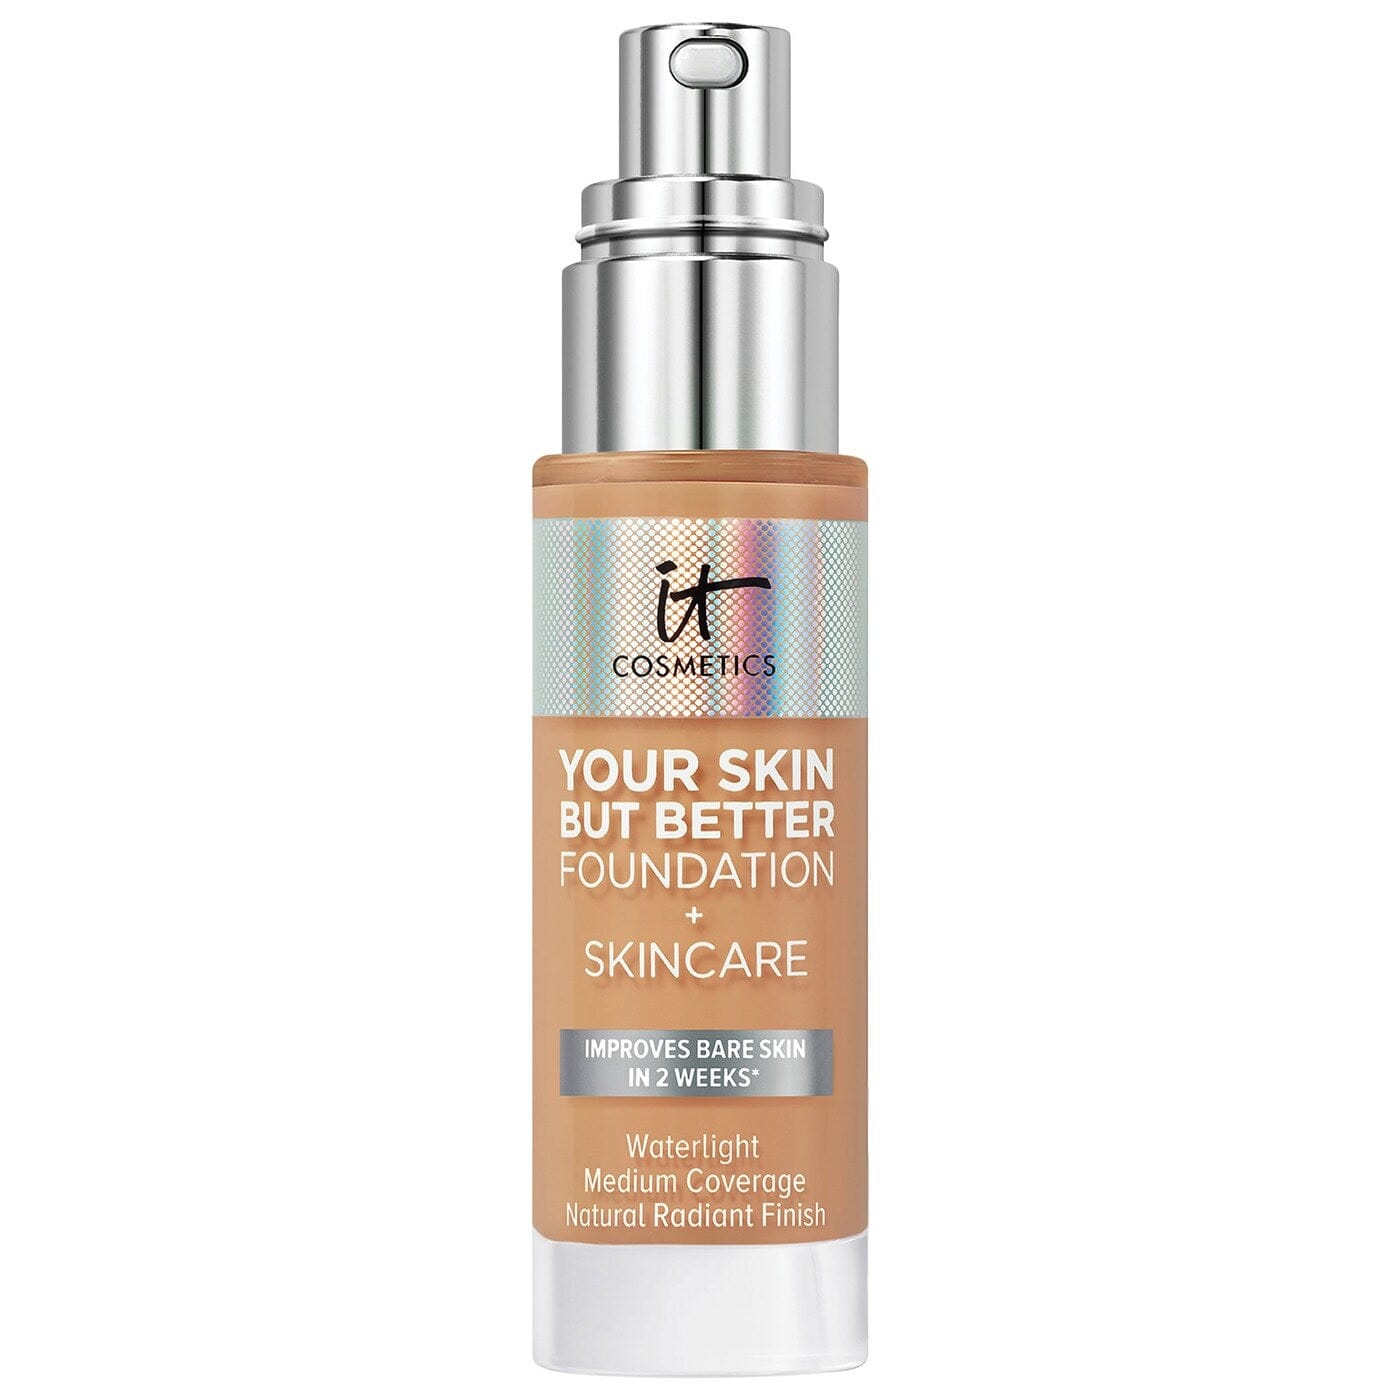 IT COSMETICS Beauty IT Cosmetics Your Skin But Better Foundation and Skincare 30ml - 41 Tan Warm